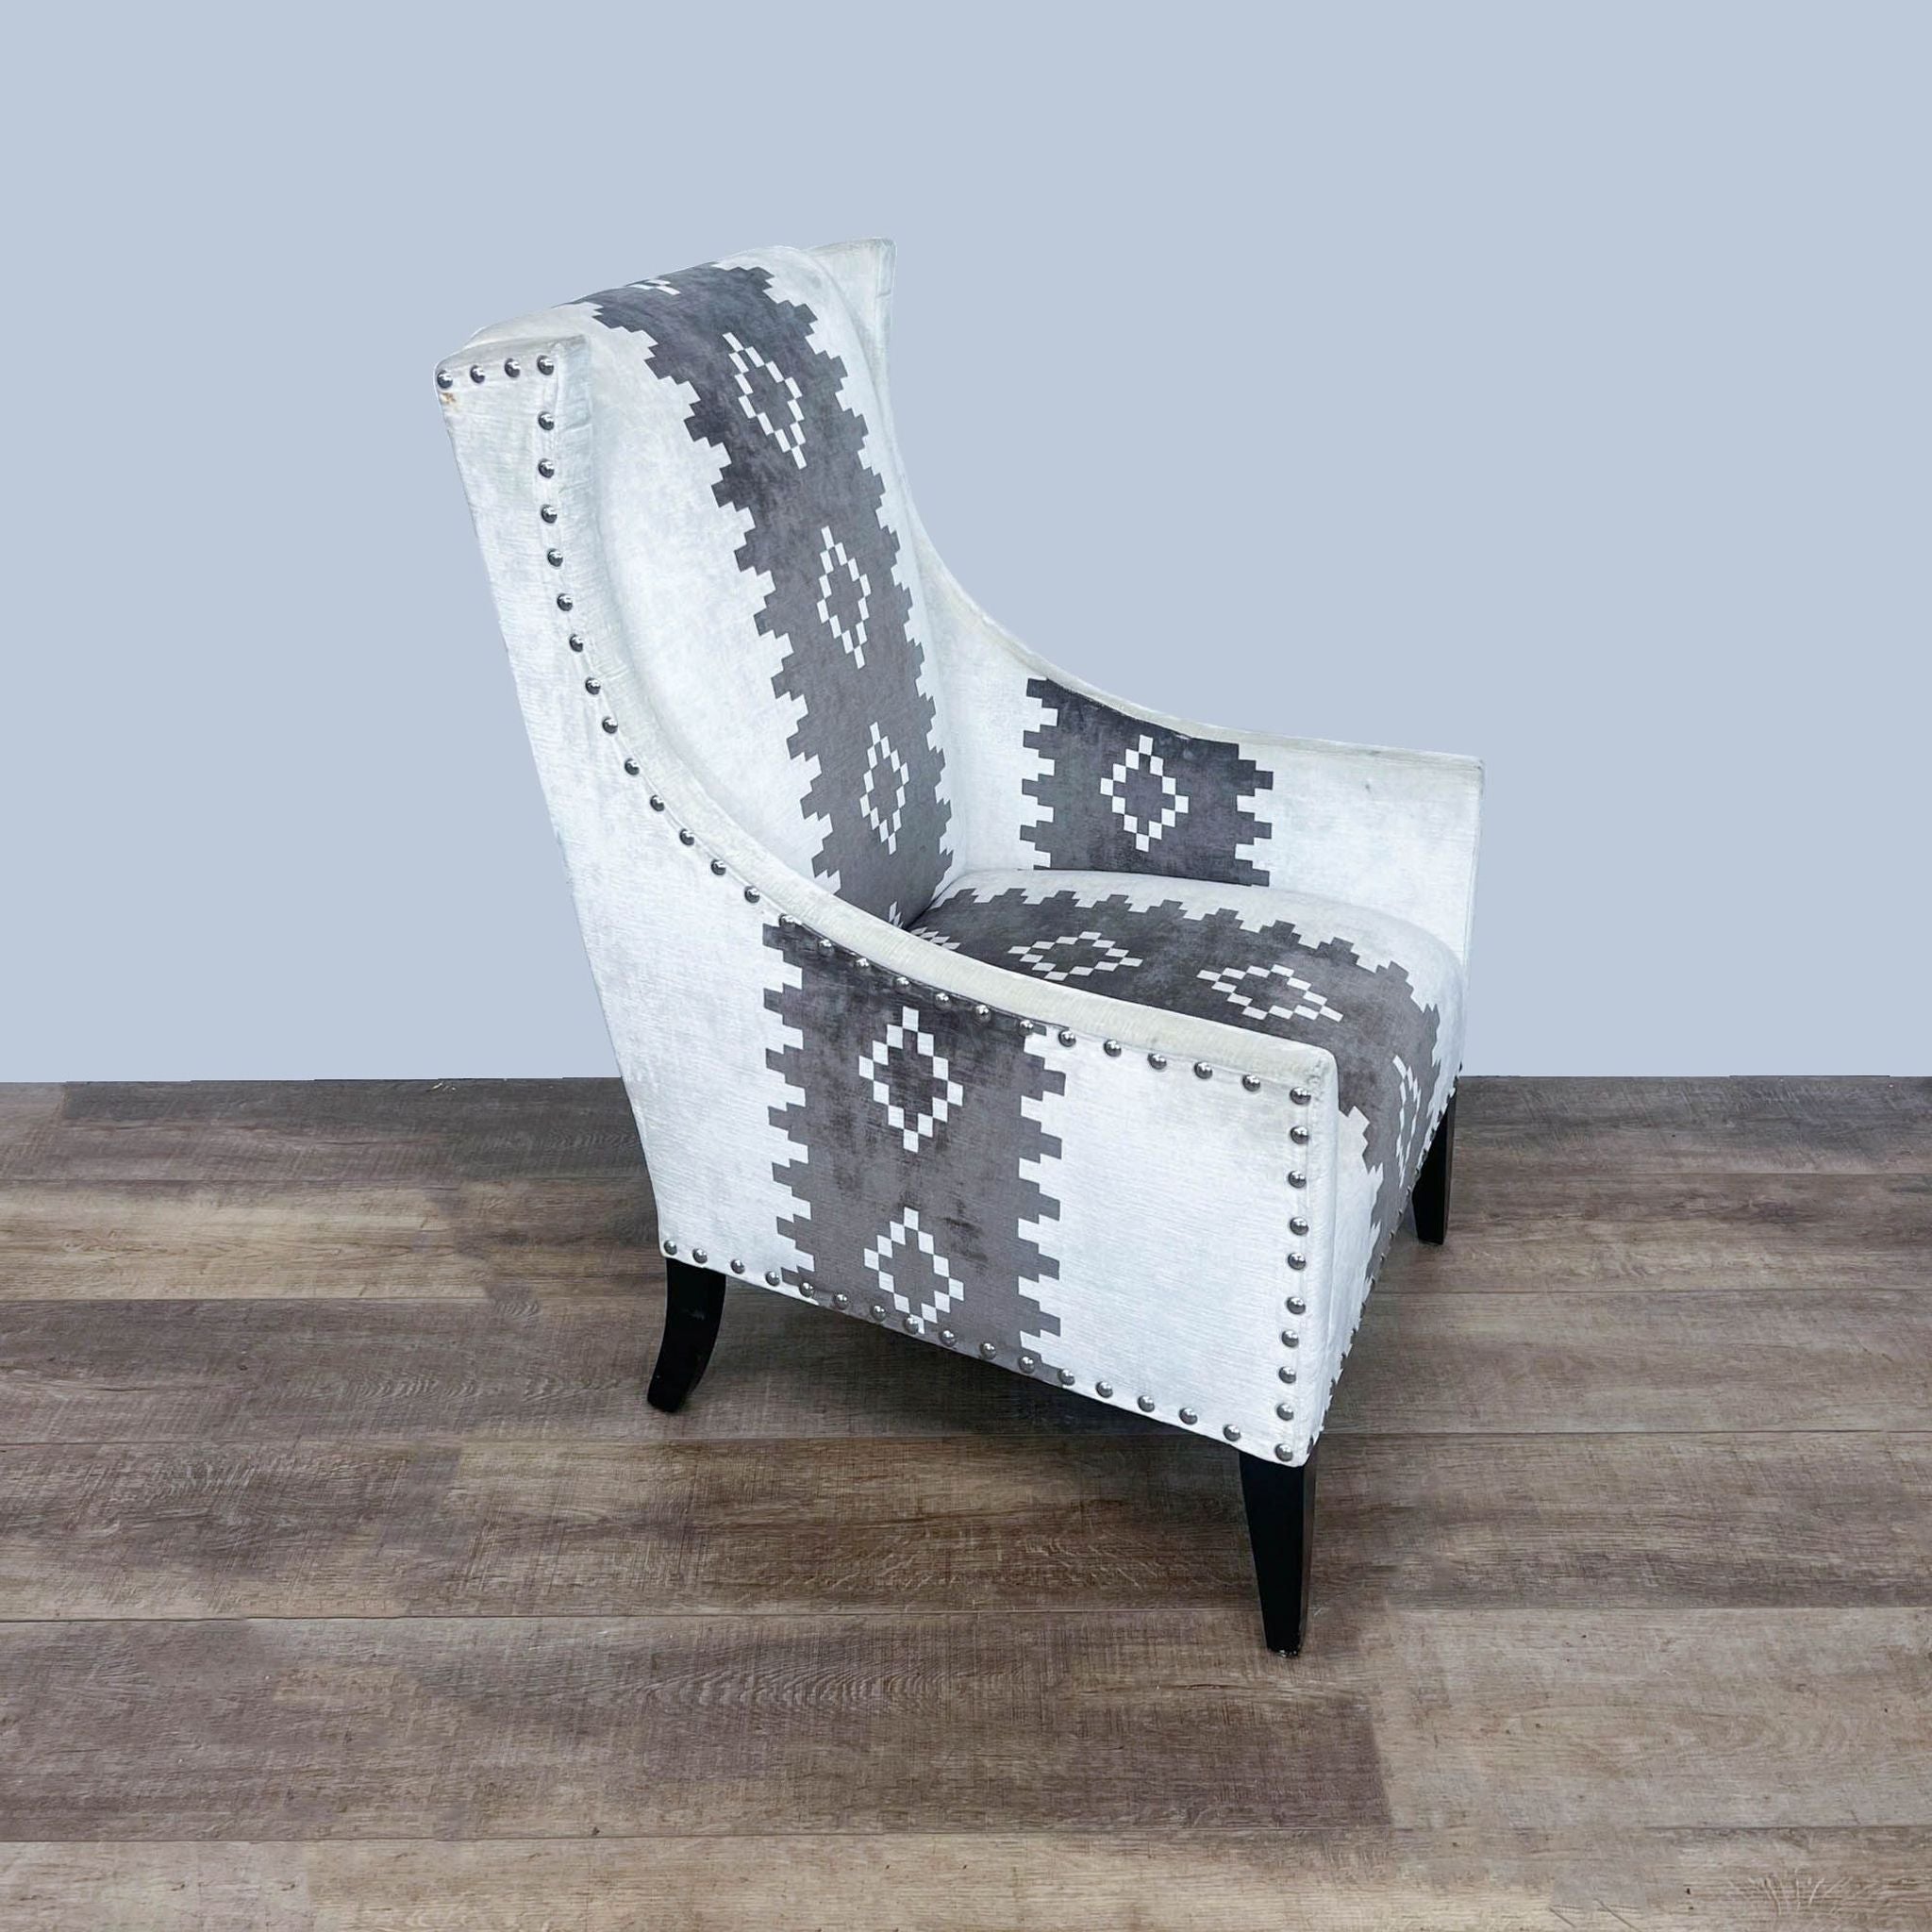 Western print upholstered Pluto chair by Andrew Martin with padded seat and nailhead trim, angled view on wooden flooring.